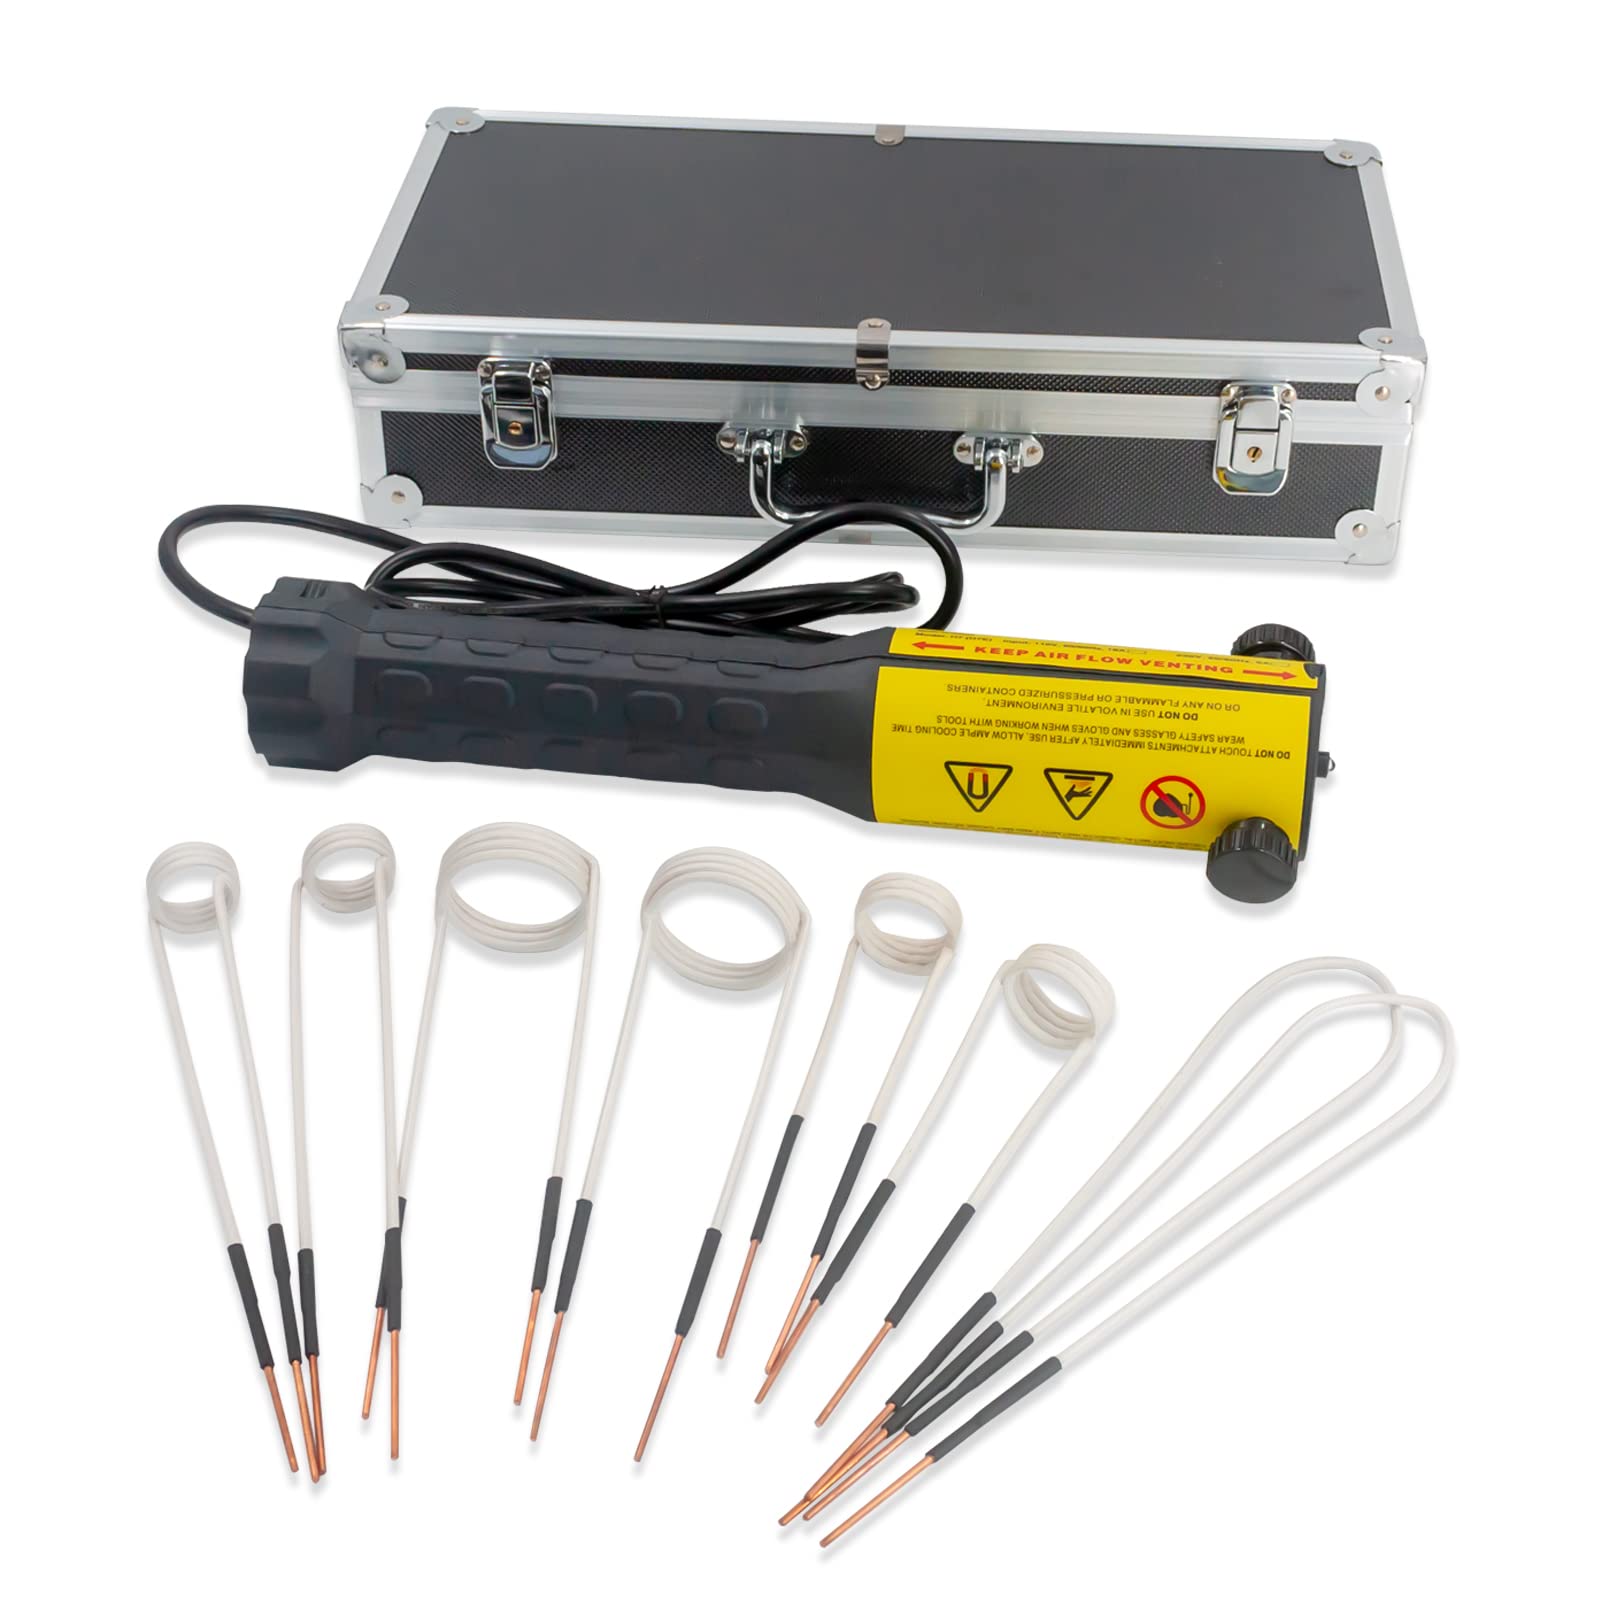 Solary Flameless Heat Induction Tool, 1000W 110V Magnetic Induction Heater Kit with 8 Coils, Handheld Rusty Screw Removing Tool - Auto Body Collision Repair Welding Products